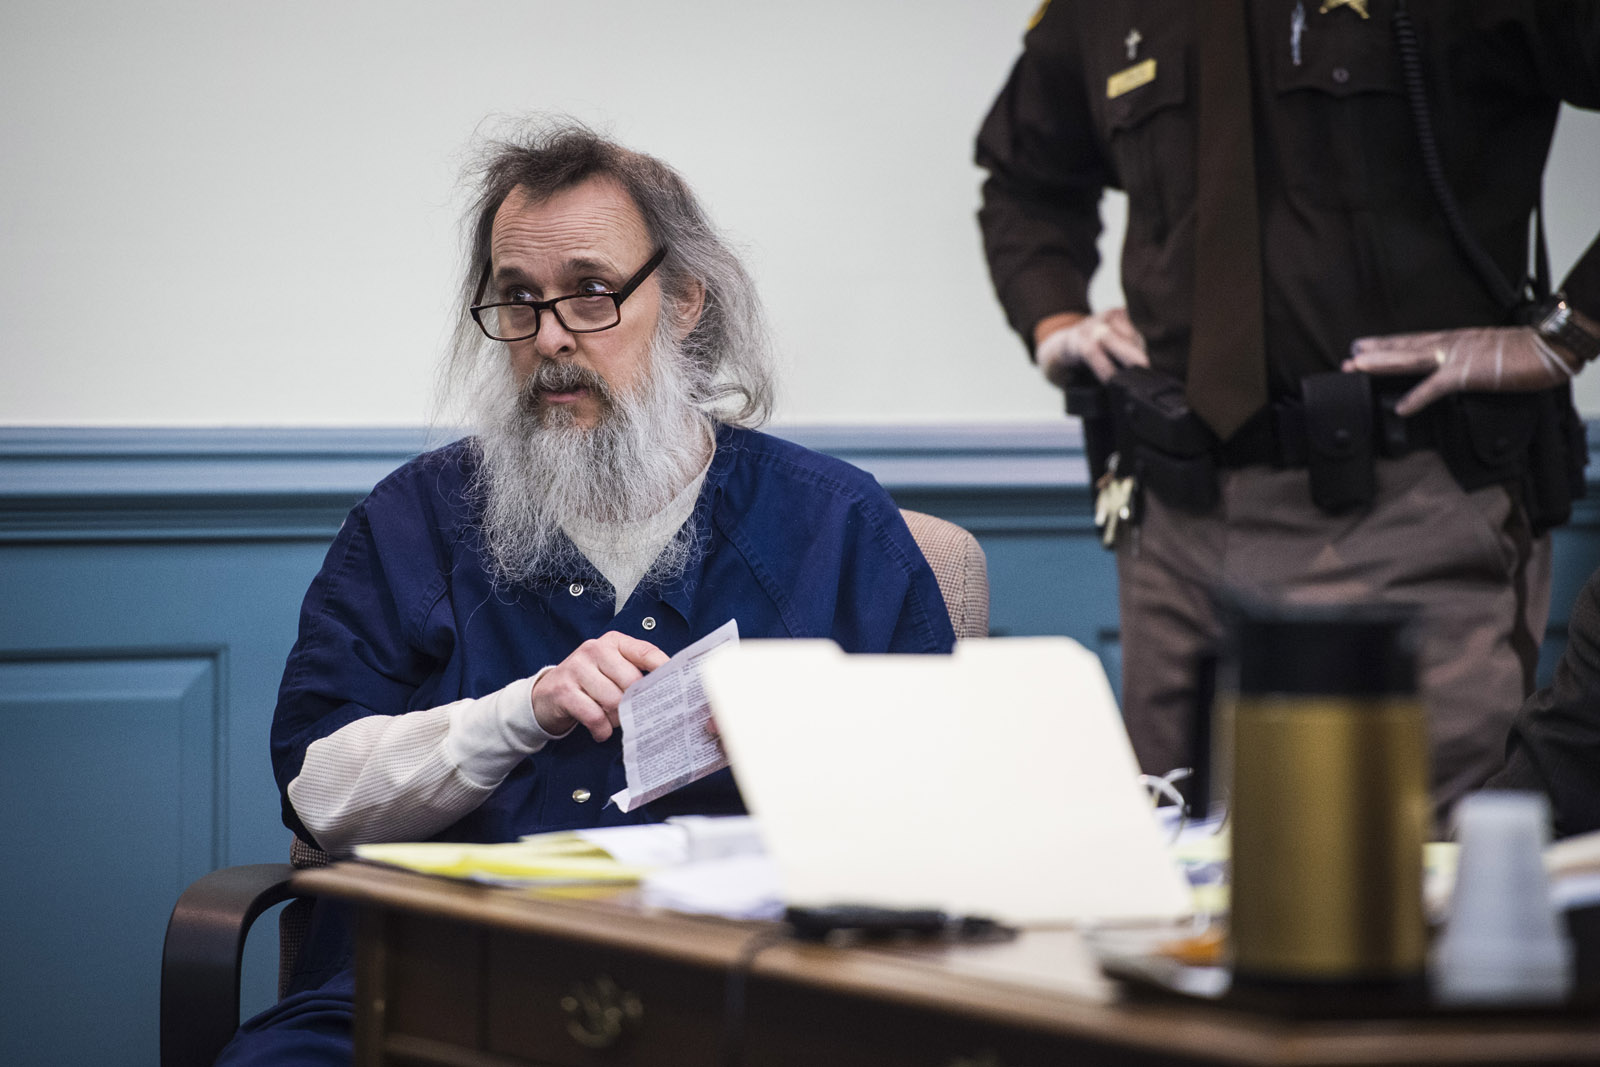 Judge agrees to move venue for Severance trial